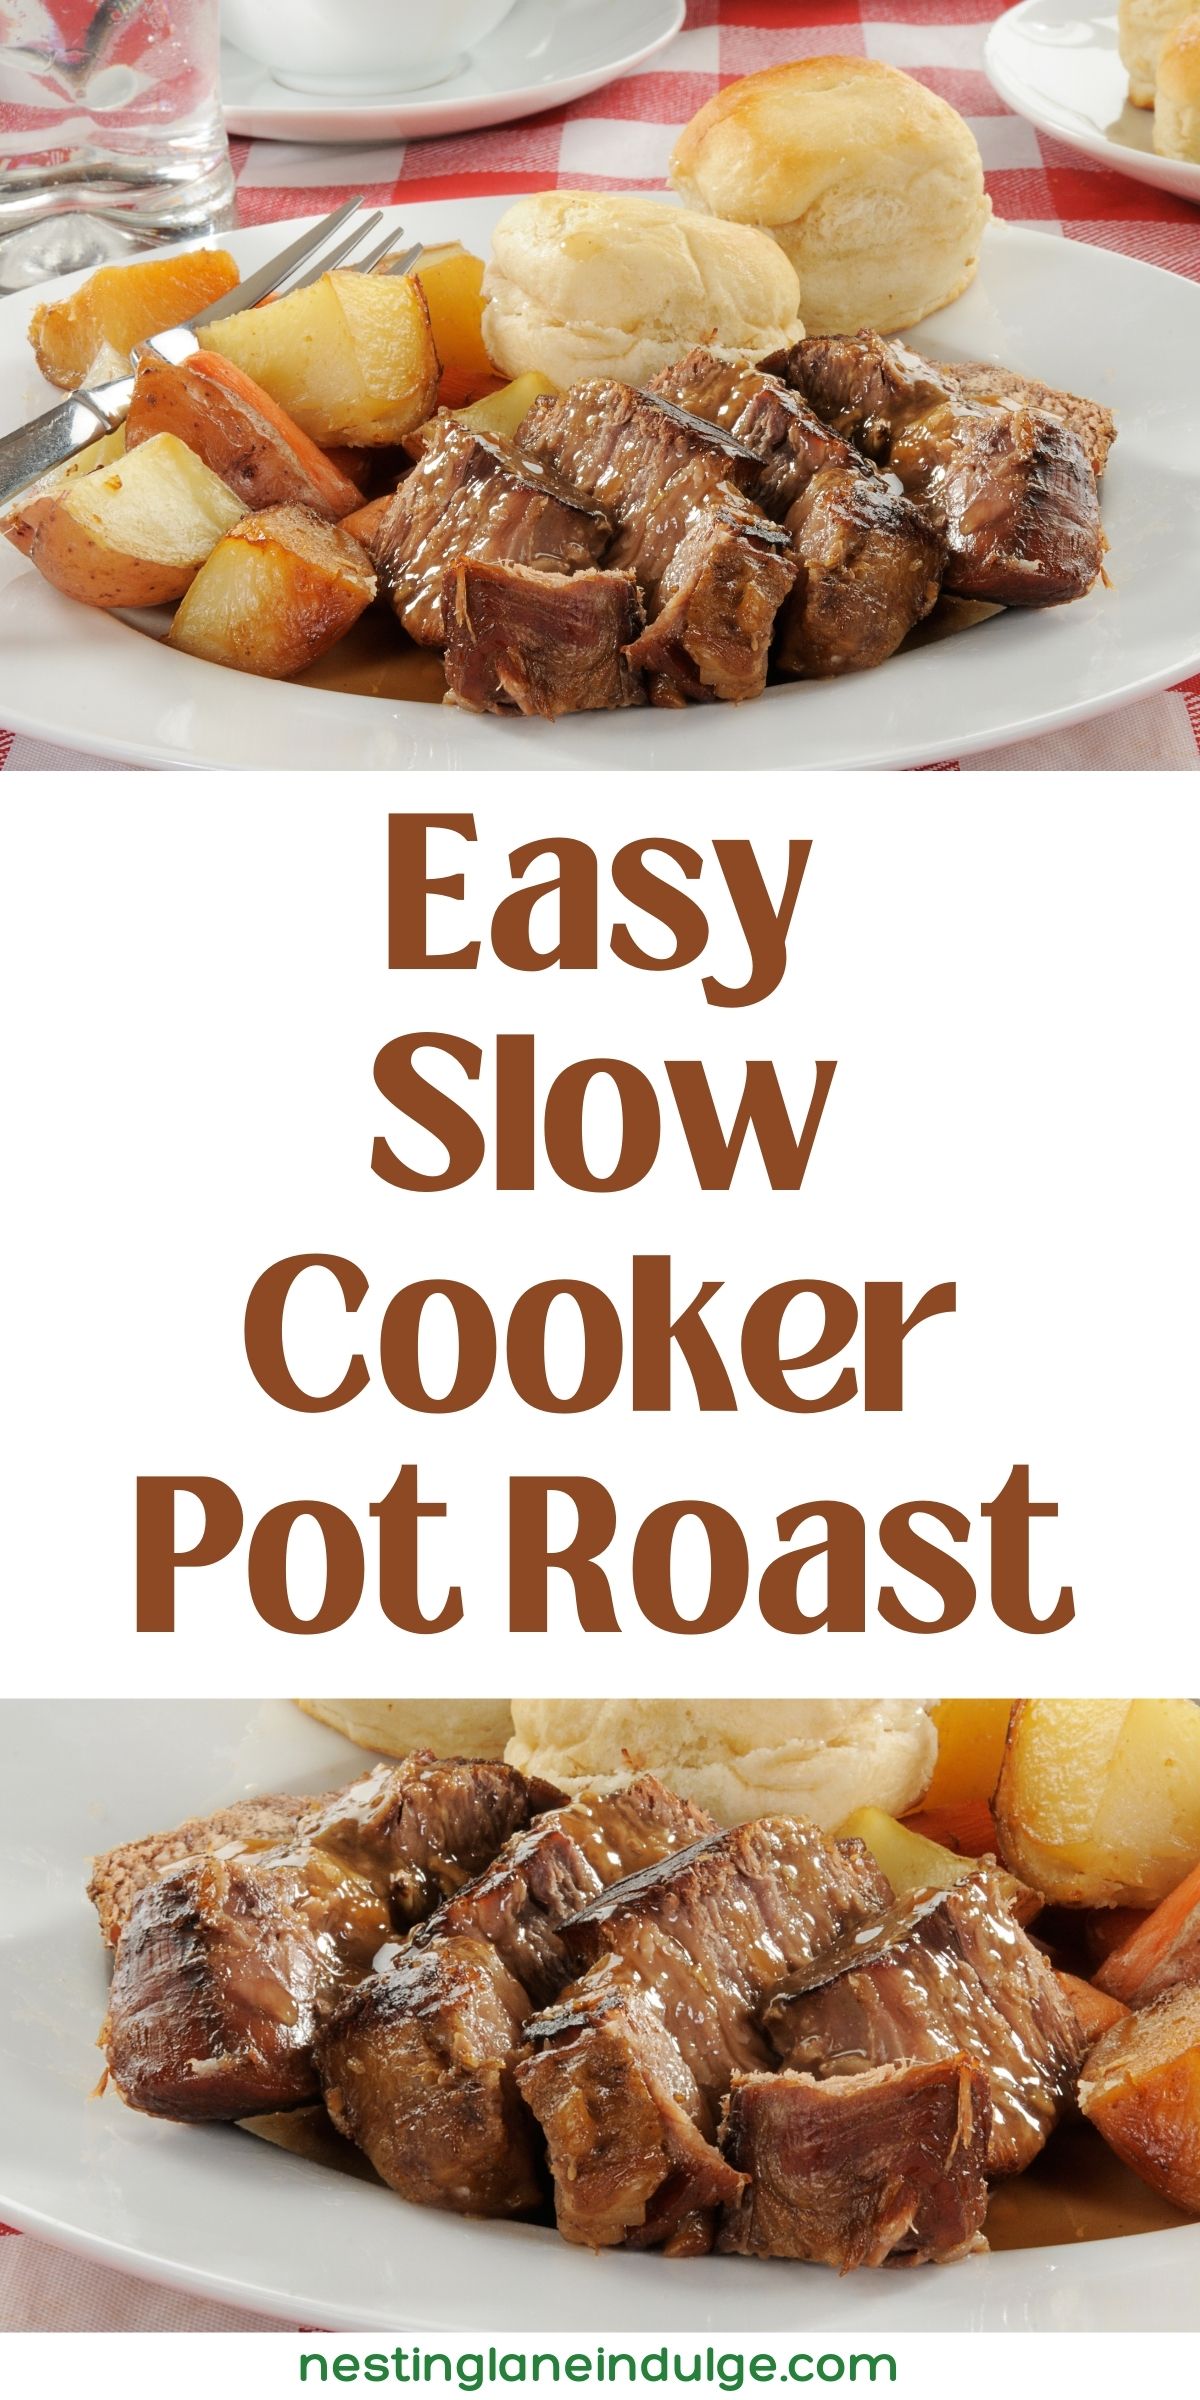 Easy Slow Cooker Pot Roast (Effortlessly Delicious) Graphic.